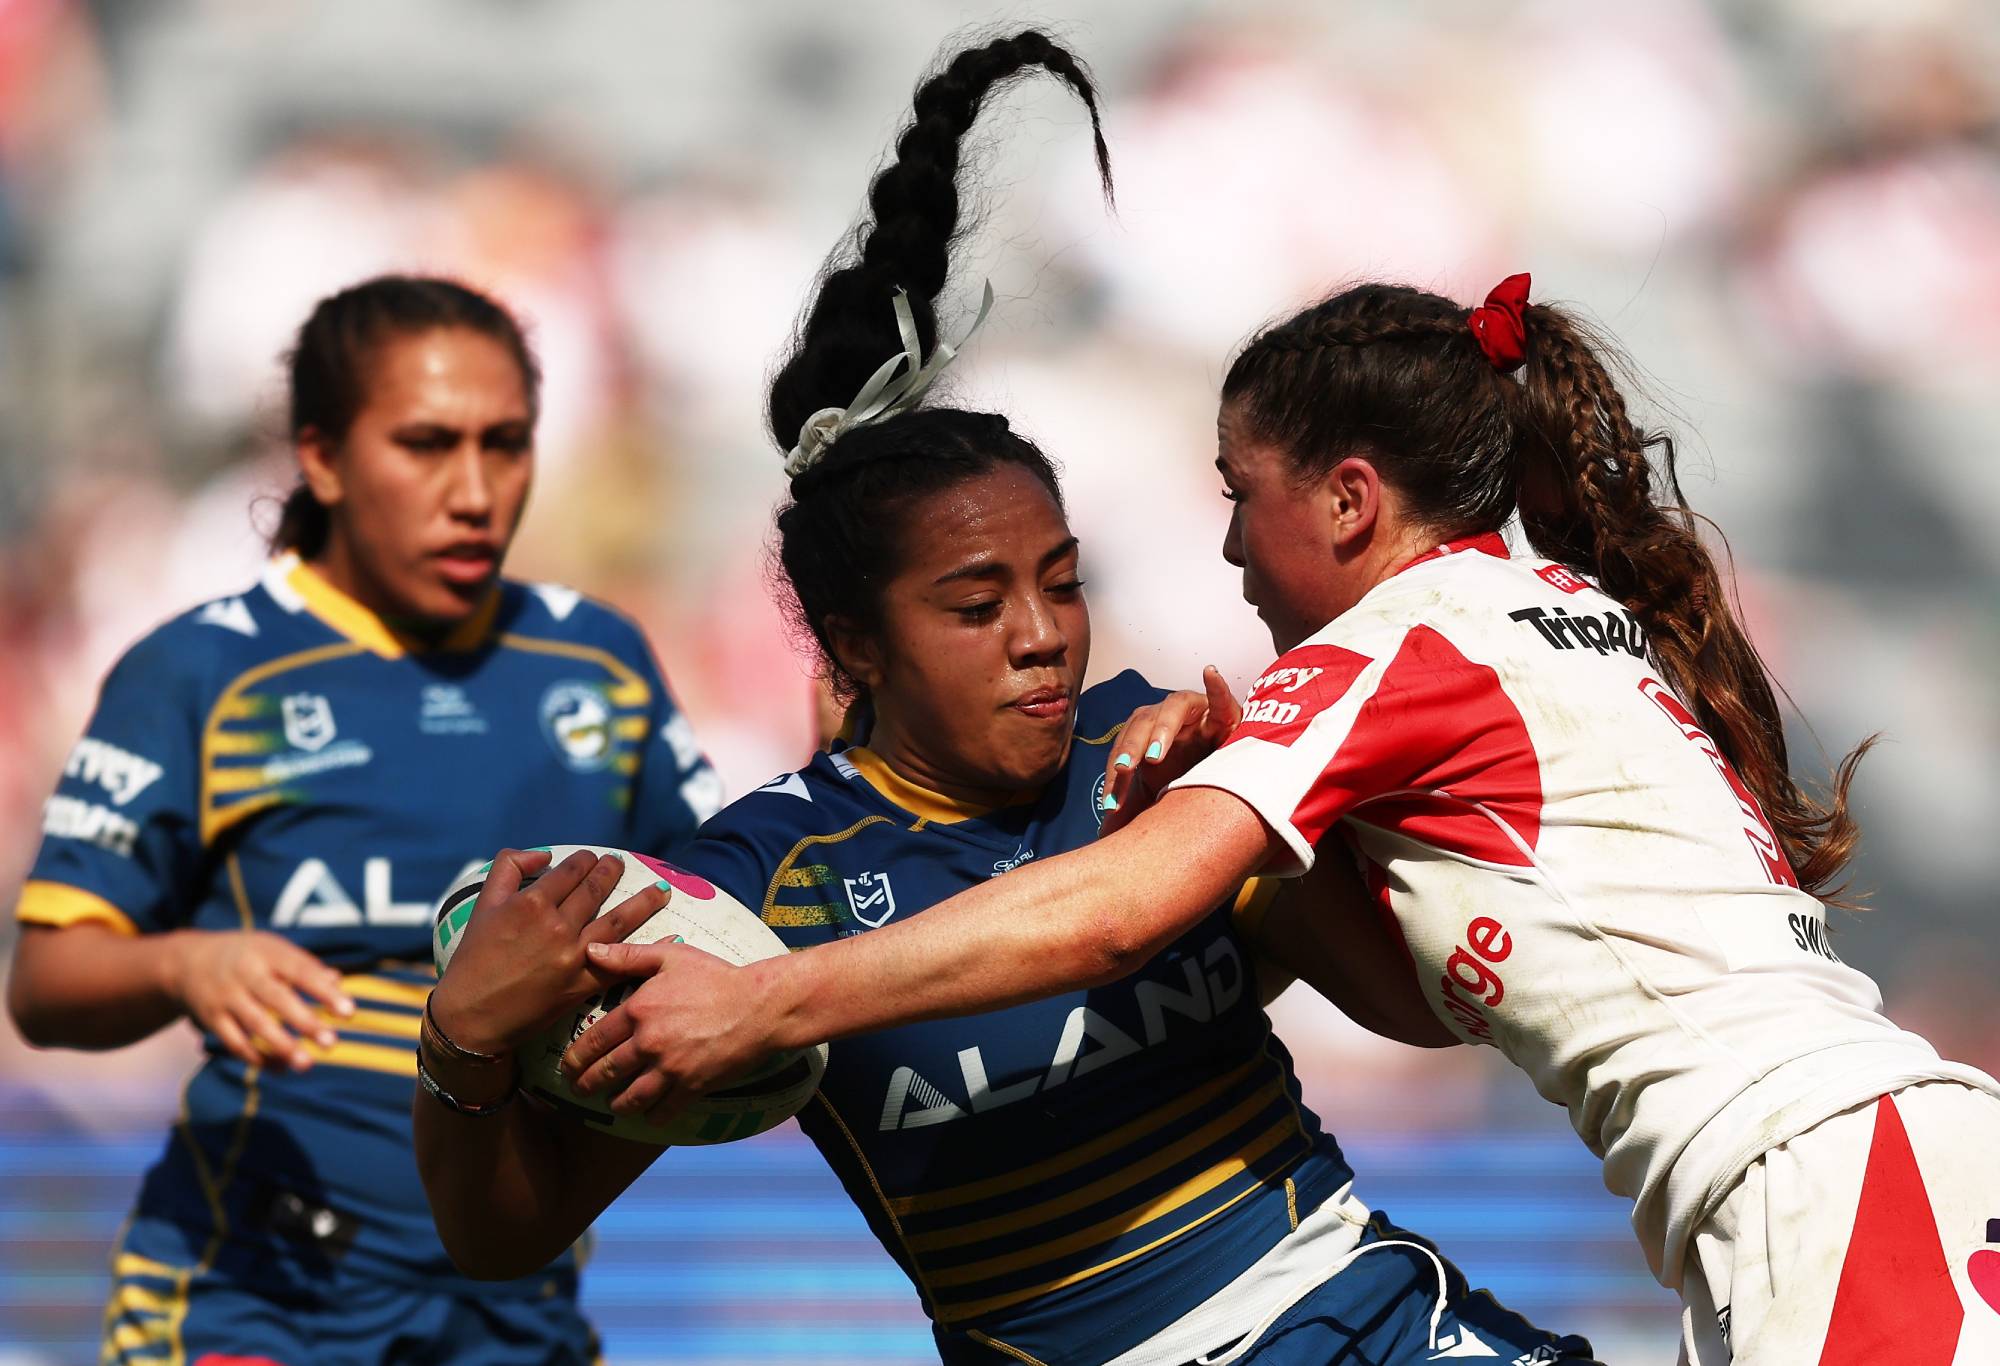 SYDNEY, AUSTRALIA - AUGUST 28: Christian Pio of the Eels is tackled during the round two NRLW match between Parramatta Eels and St George Illawarra Dragons at CommBank Stadium, on August 28, 2022, in Sydney, Australia. (Photo by Matt King/Getty Images)